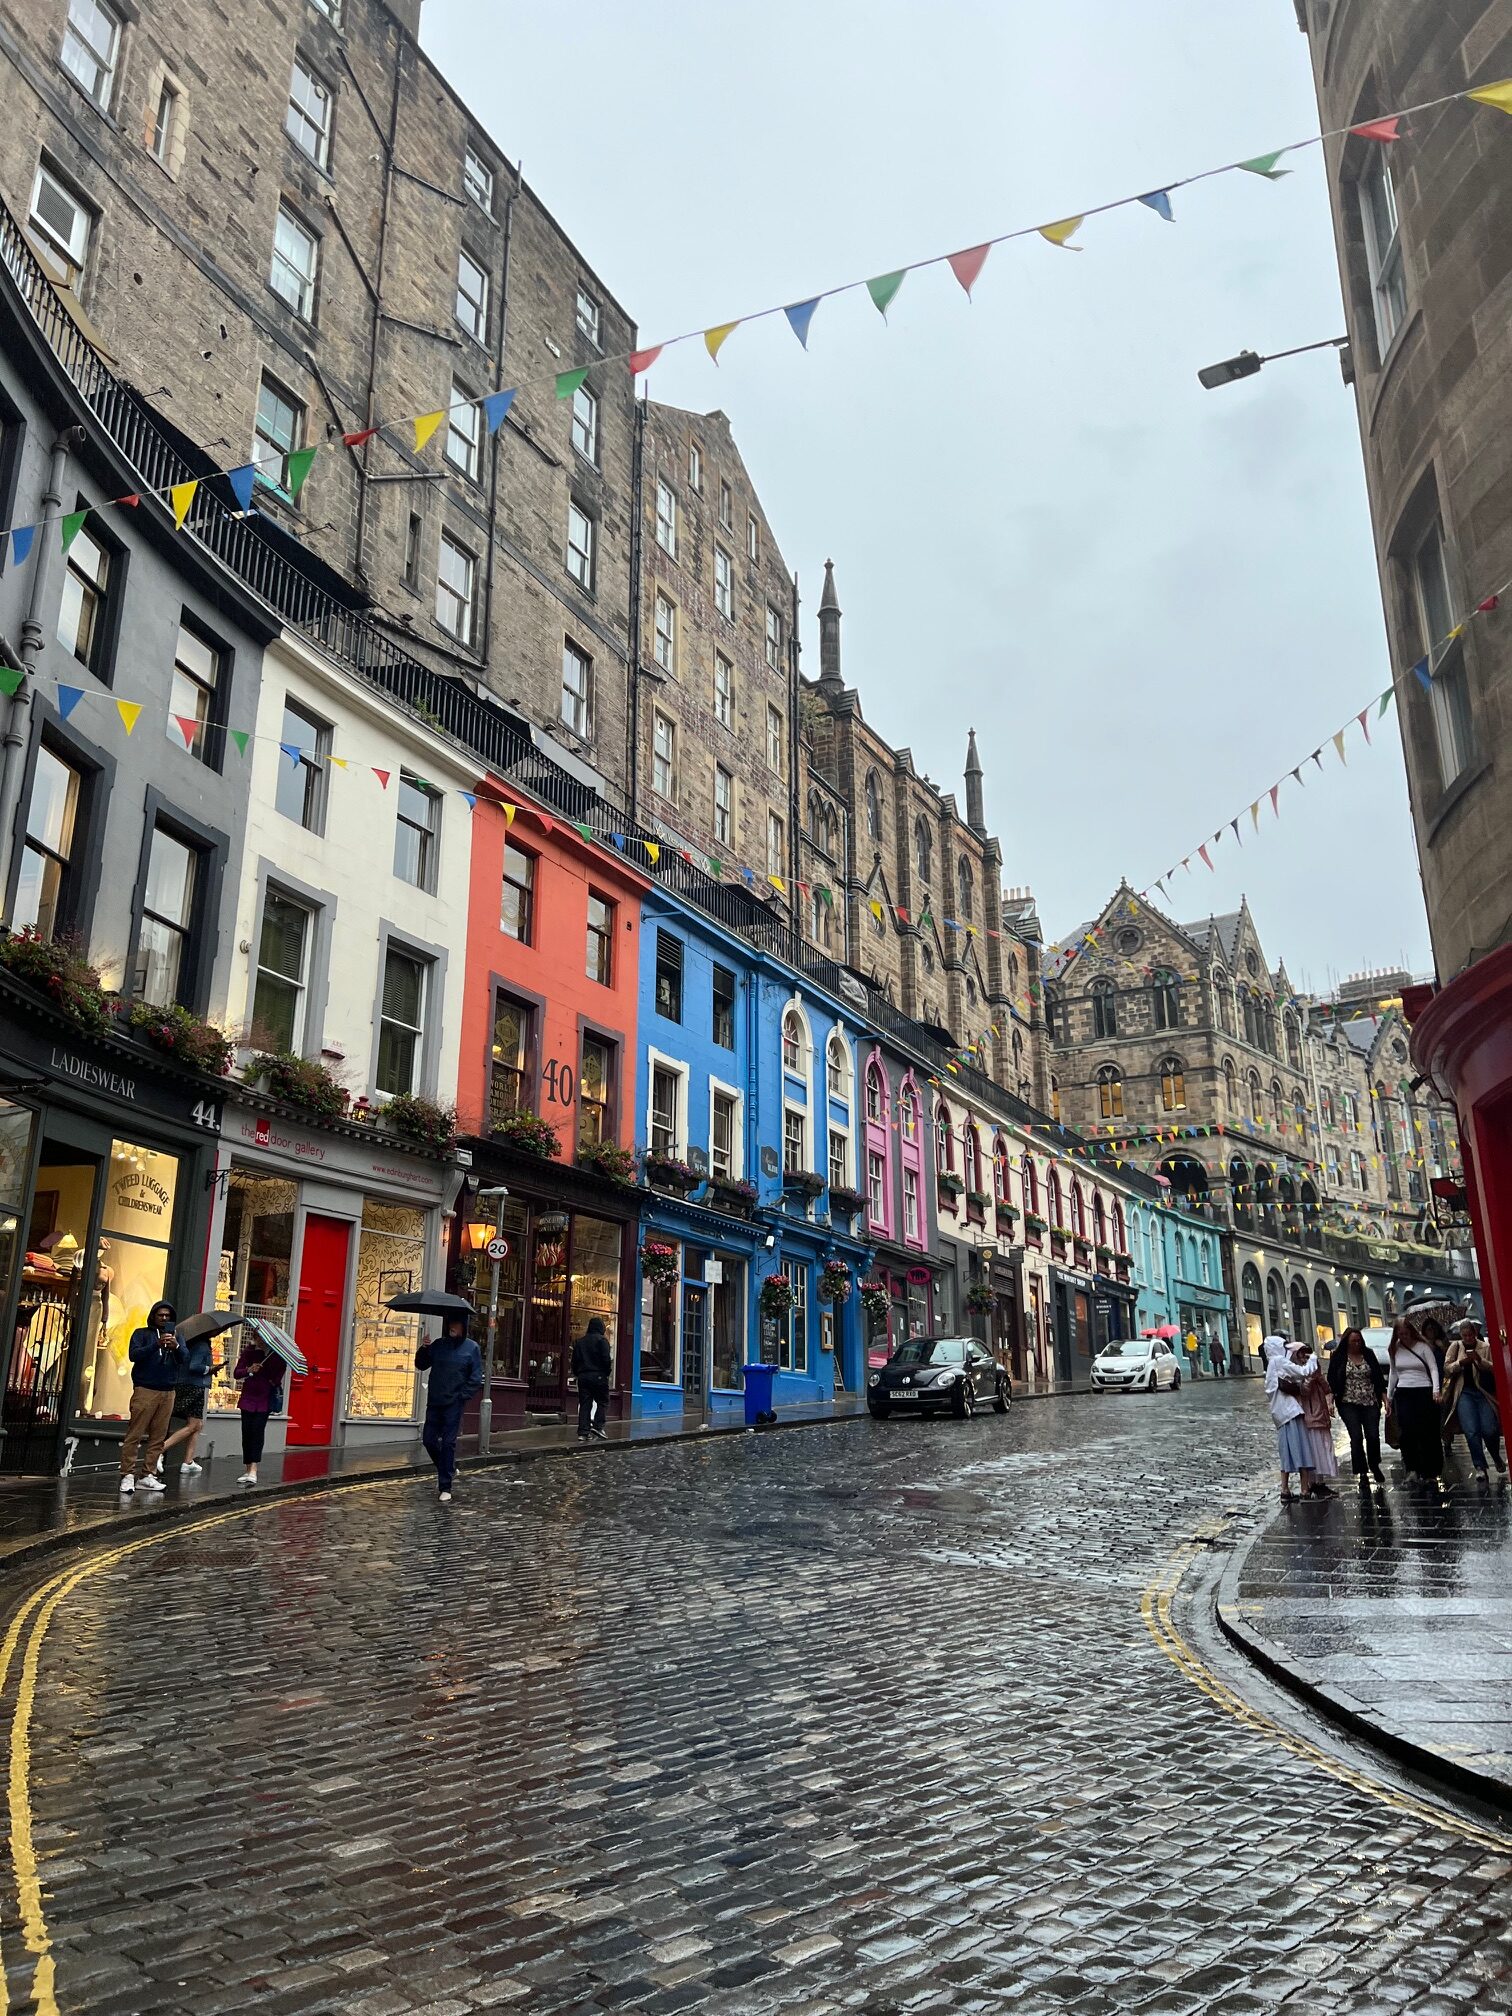 One of the prettiest streets in Edinburgh Victoria Street with curved cobblestone street with buildings and flags